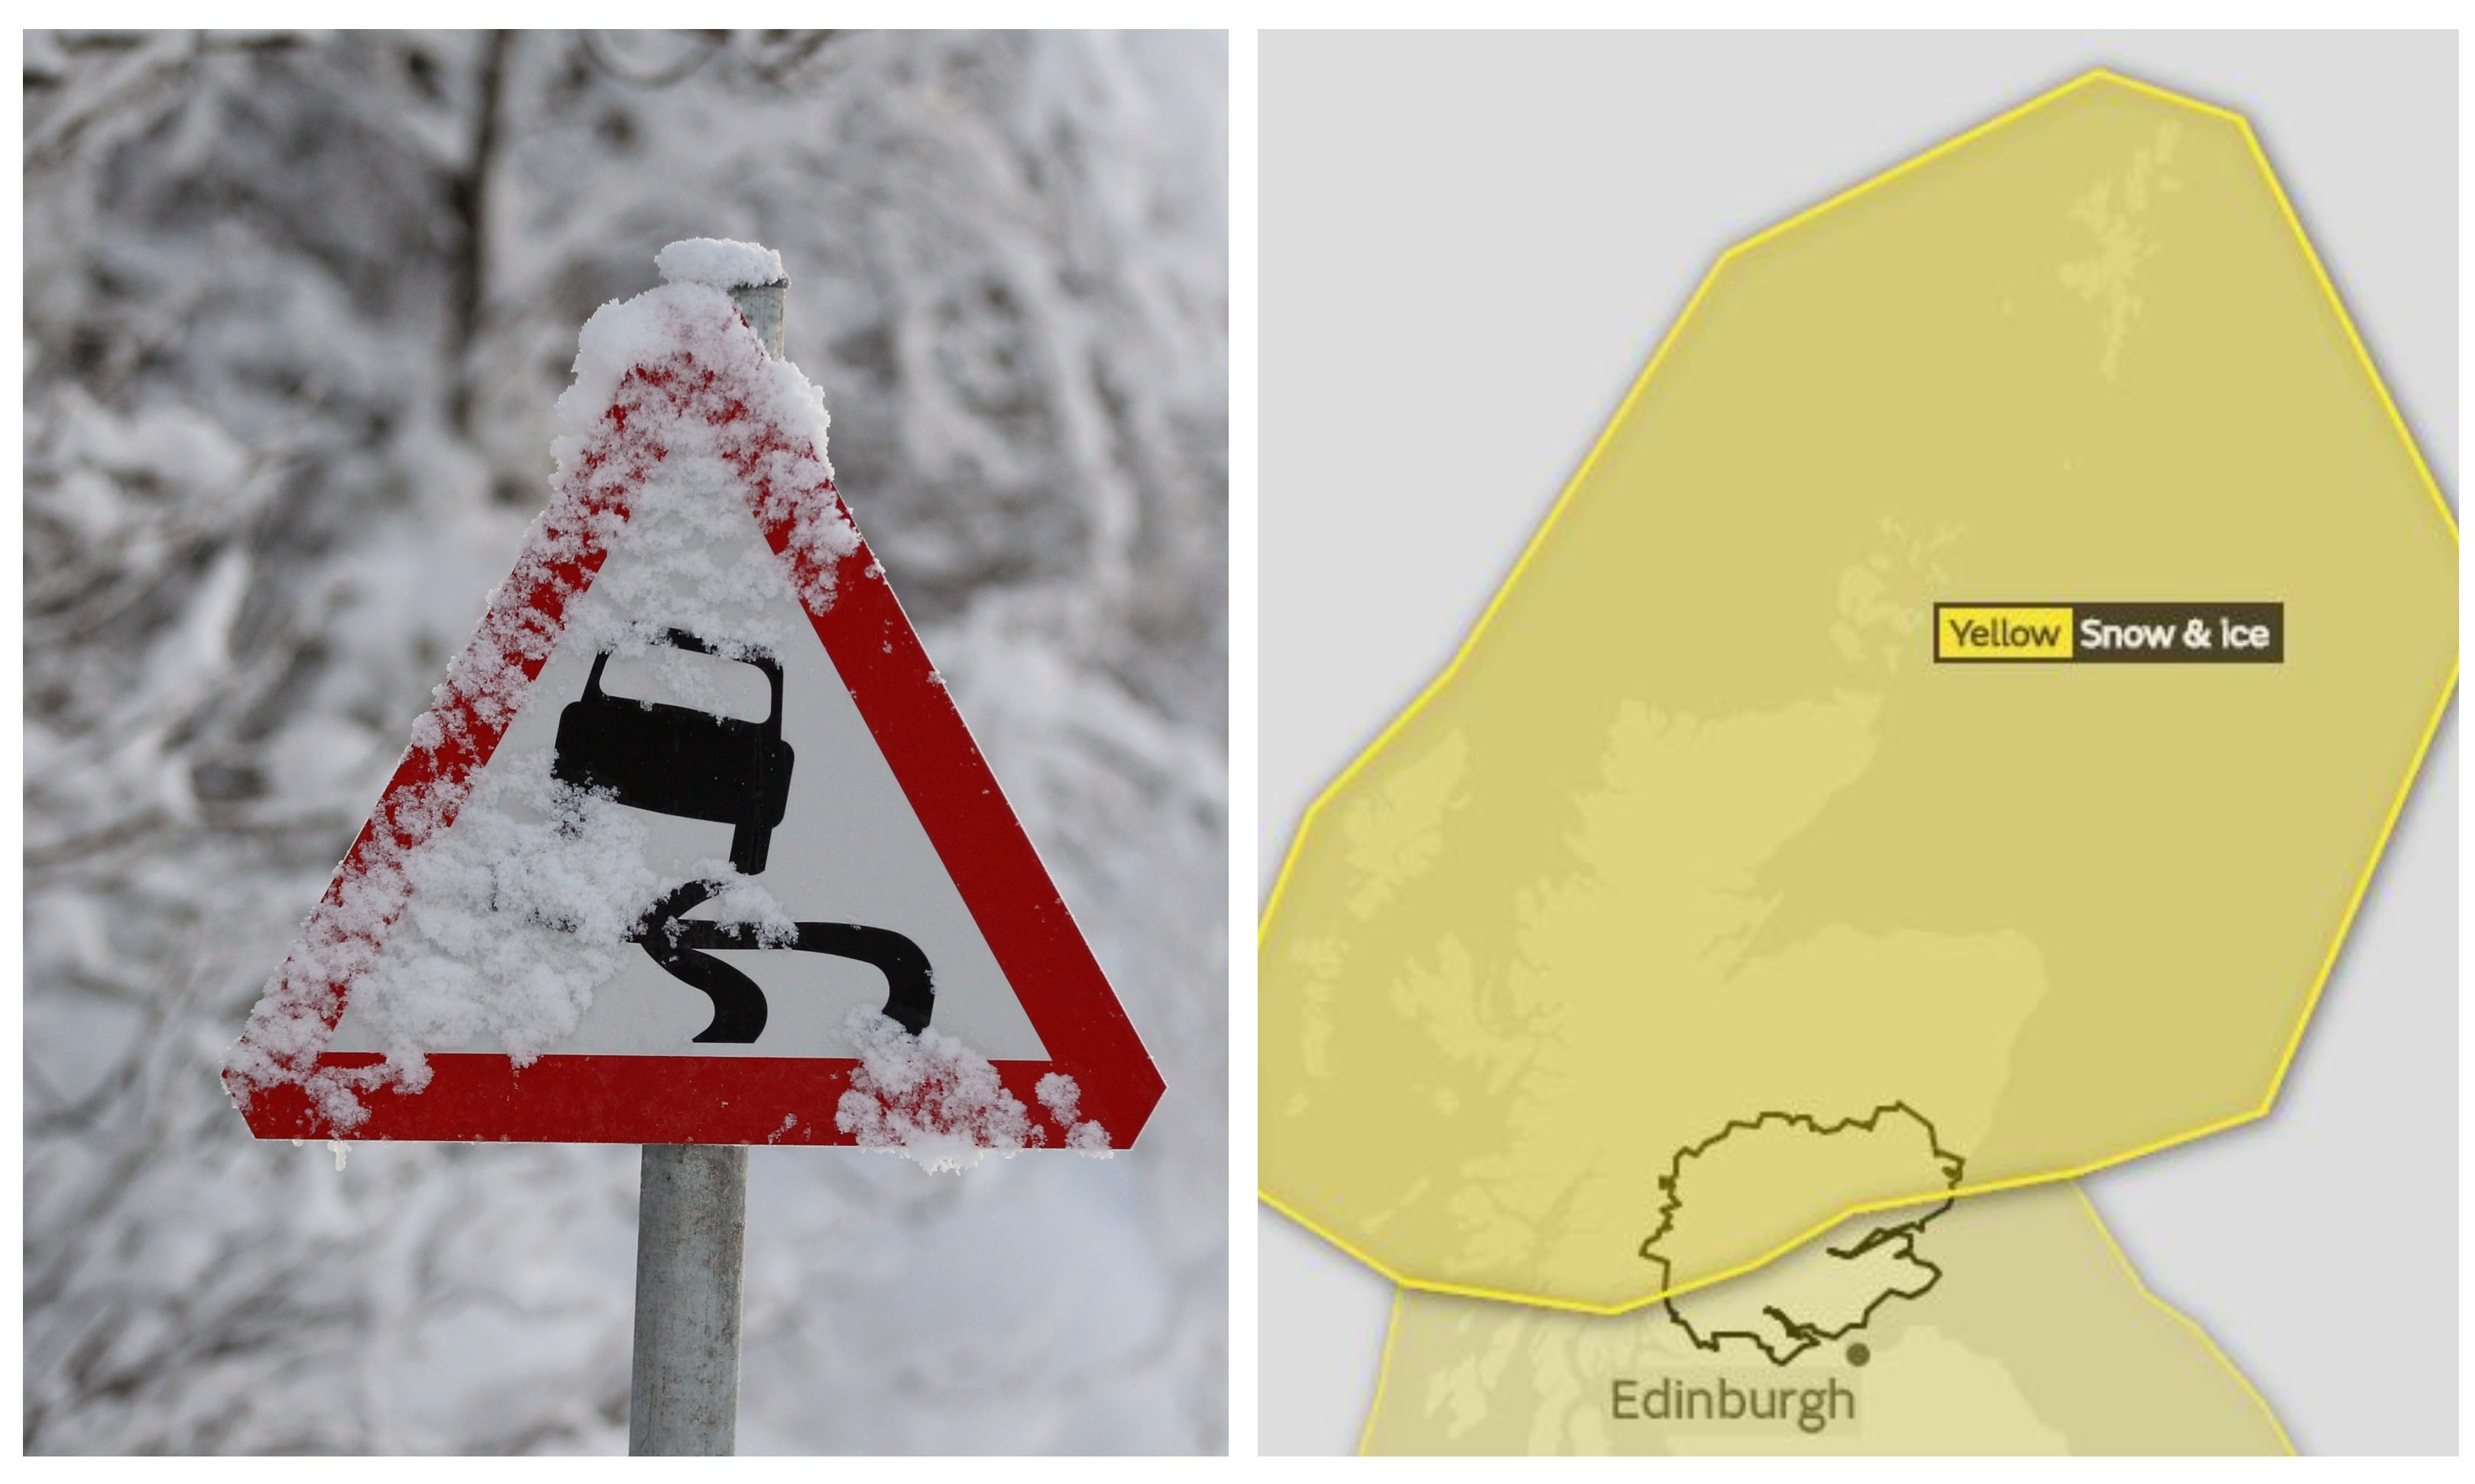 The Met Office has issued a weather warning for ice and snow.